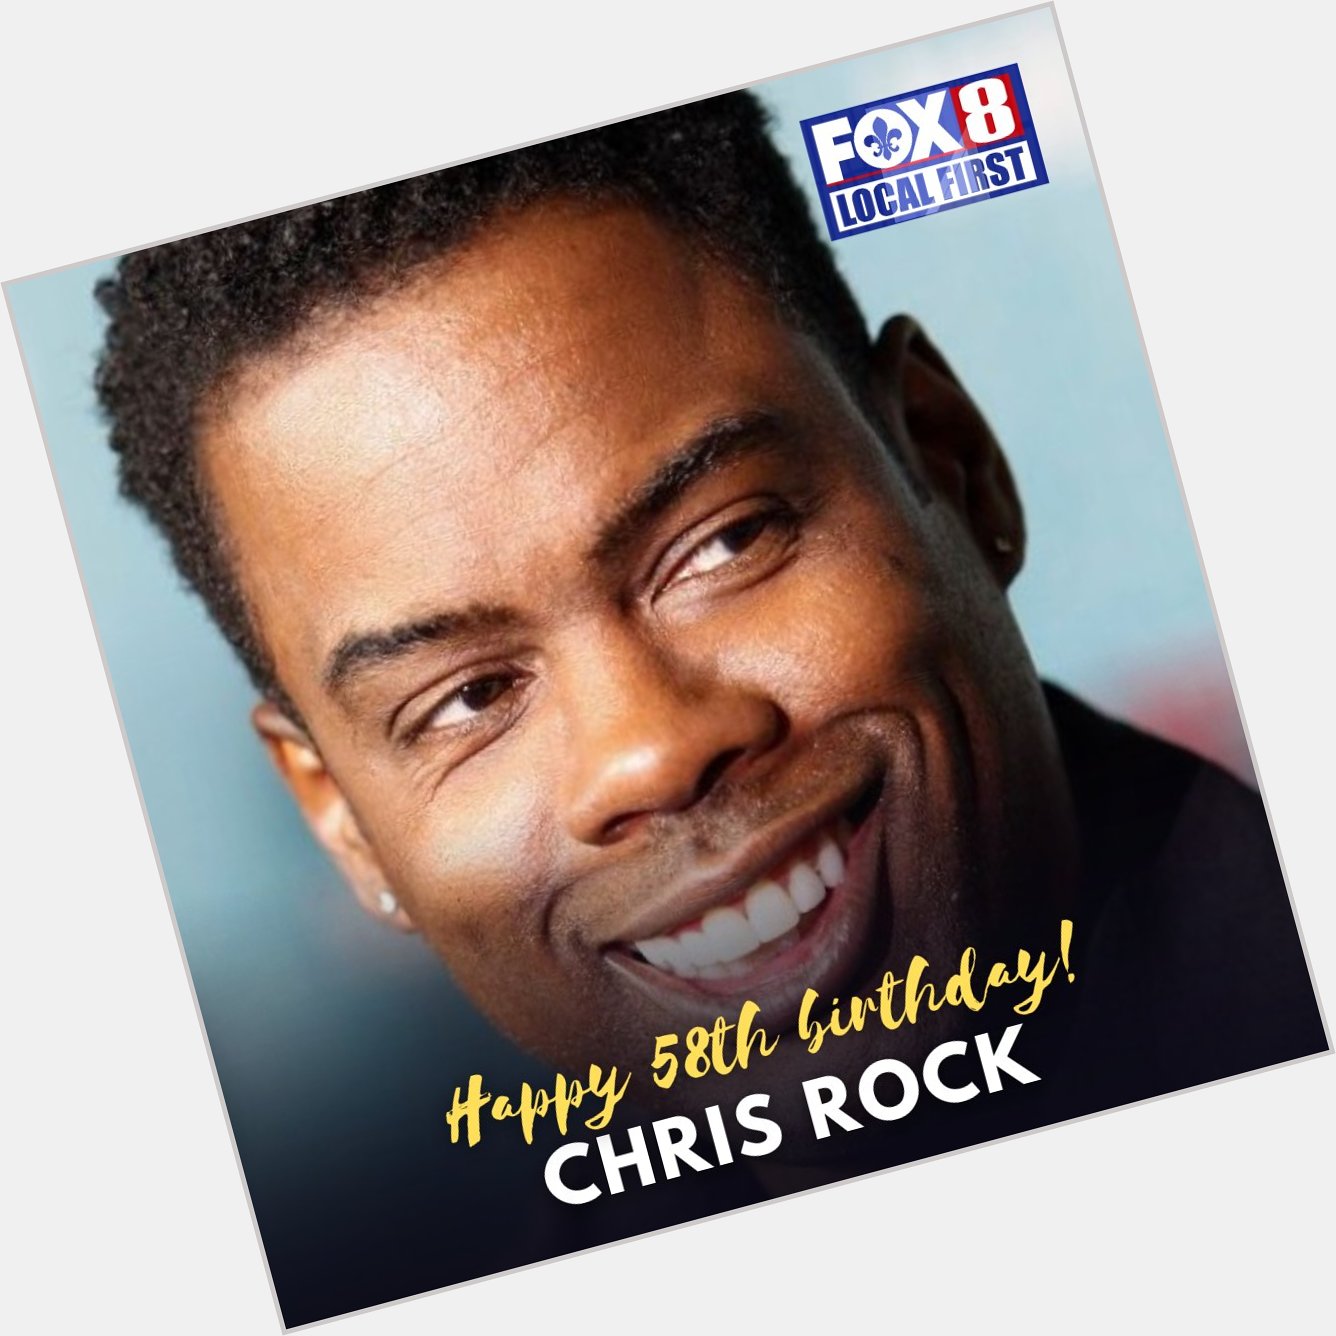 Happy birthday to comedian Chris Rock, who is 58 on Tuesday! 